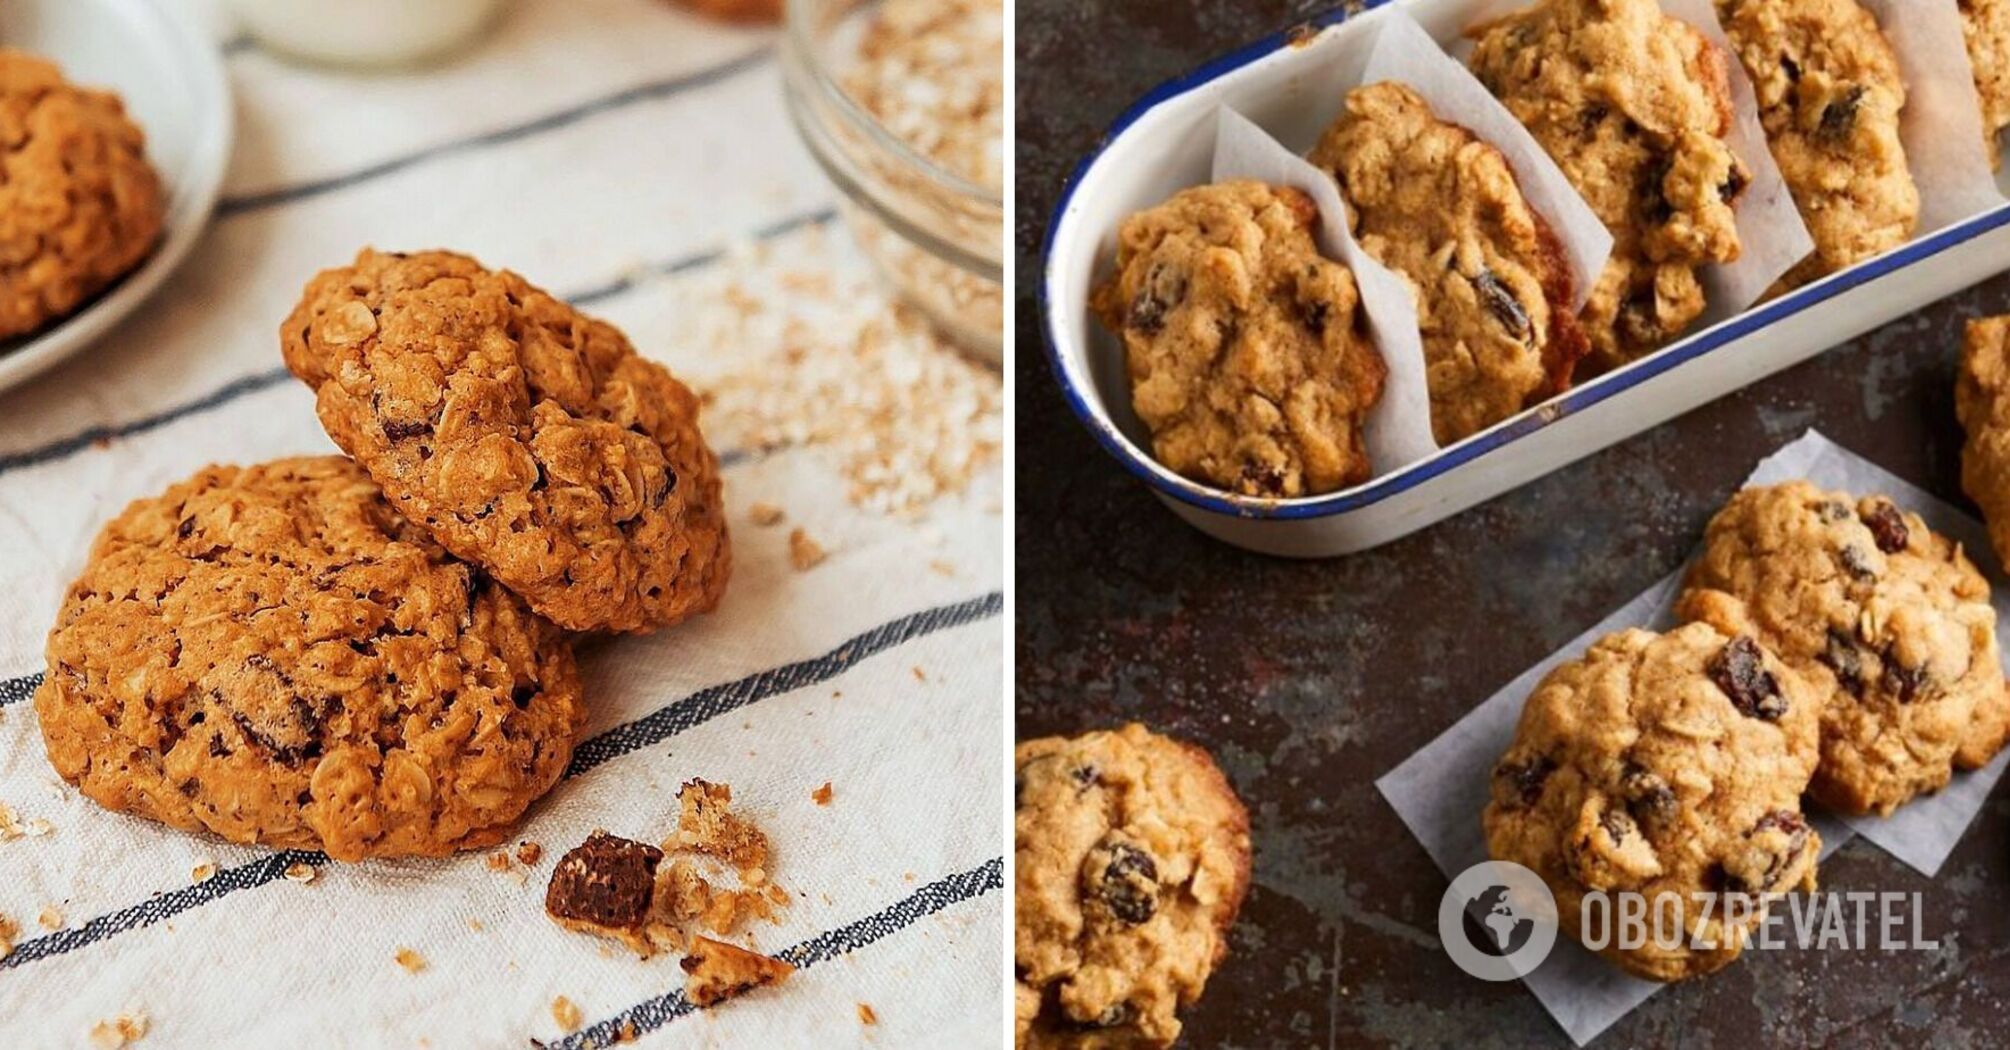 Crispy oatmeal cookies without eggs and flour: you only need three ingredients